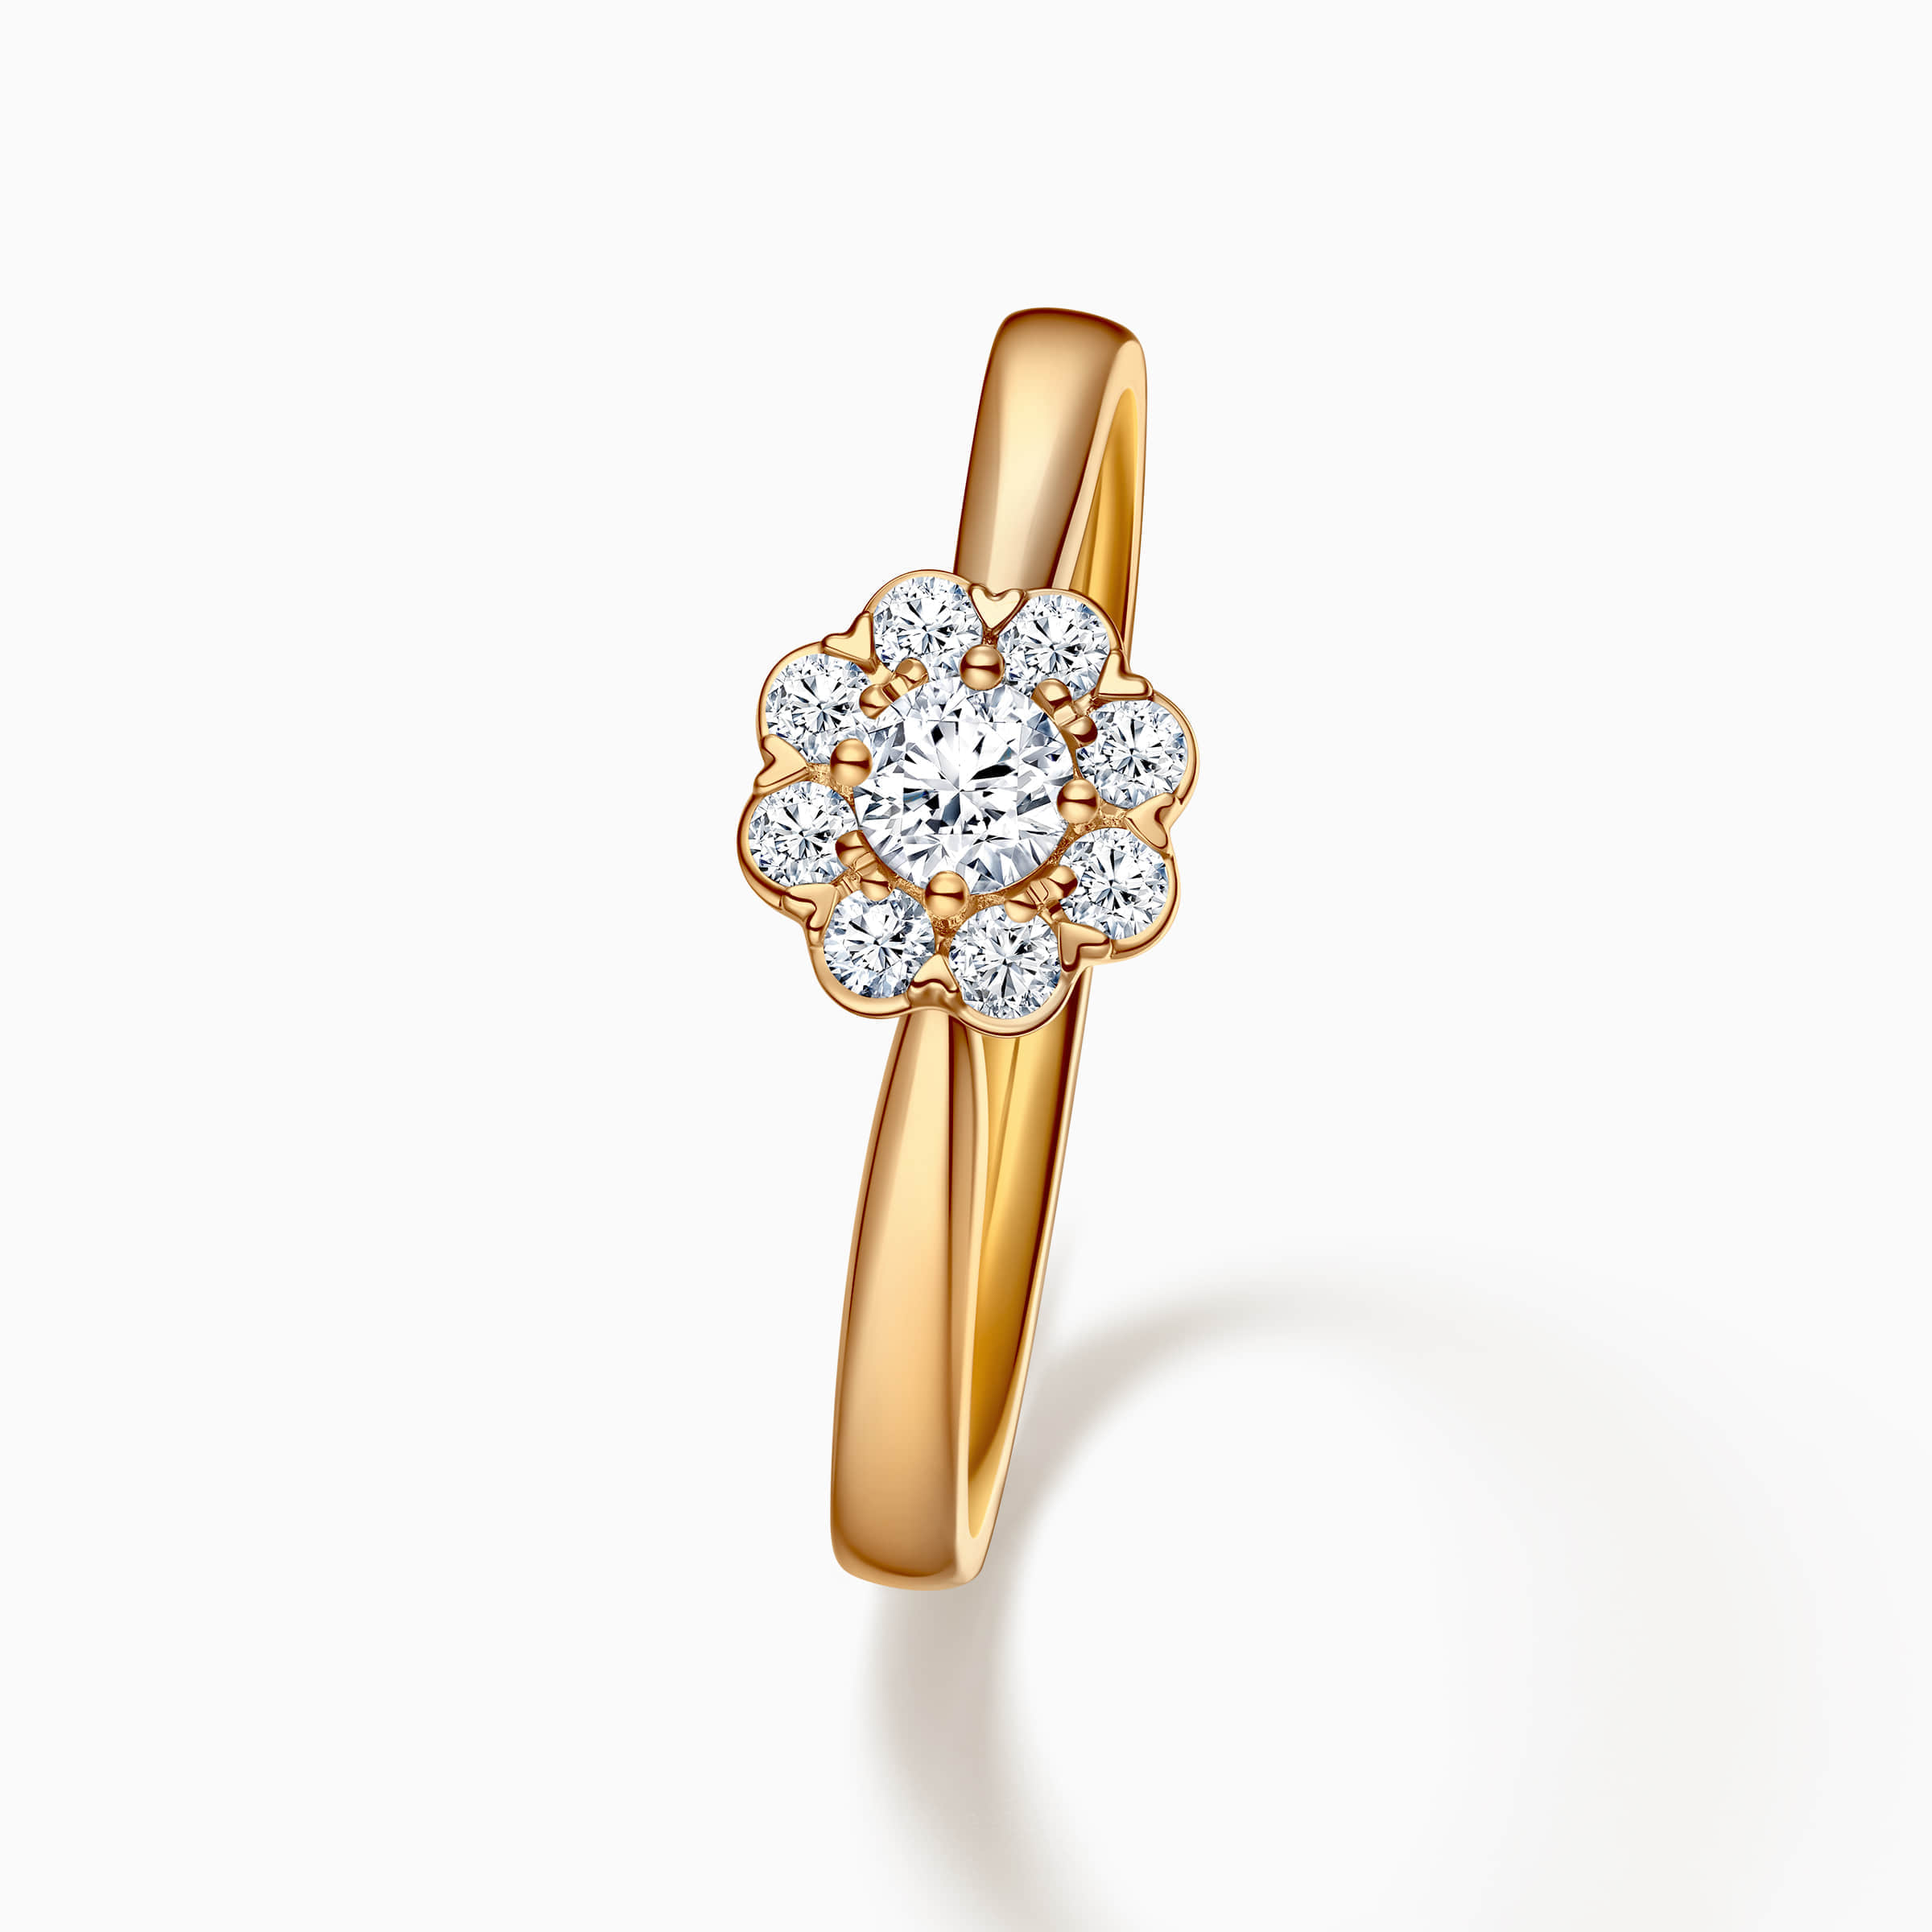 Darry Ring floral halo engagement ring